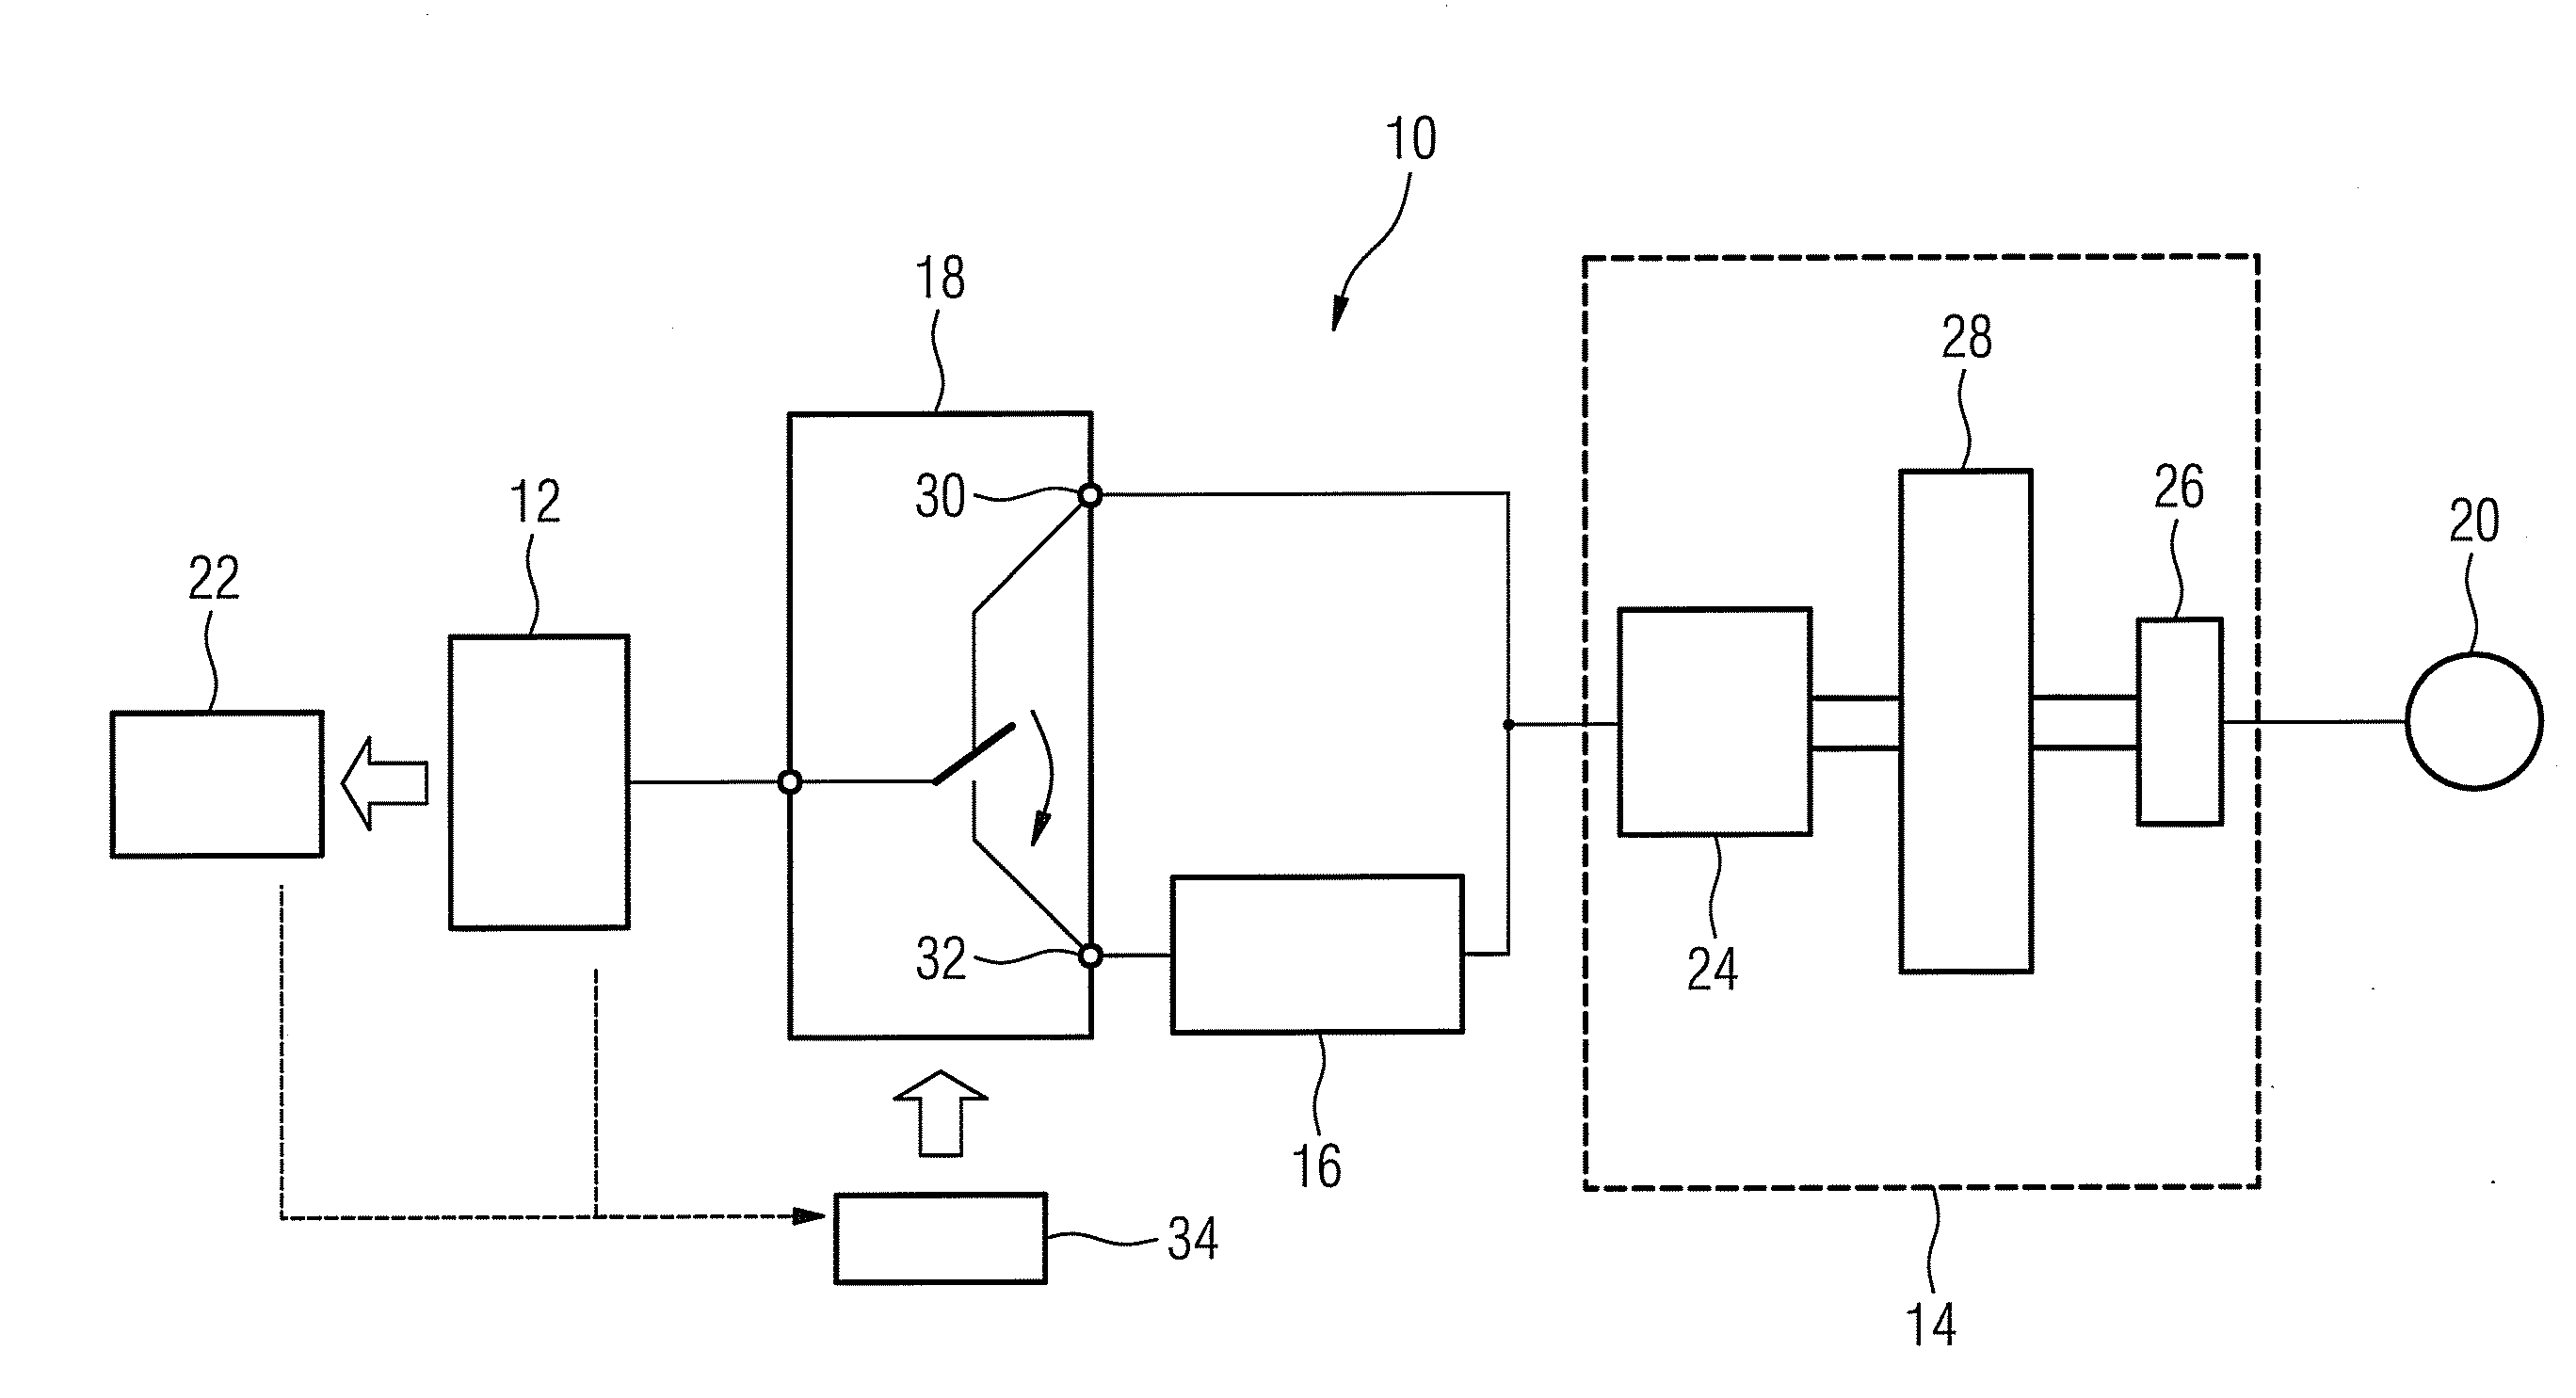 Drive Apparatus and Method for Its Operation